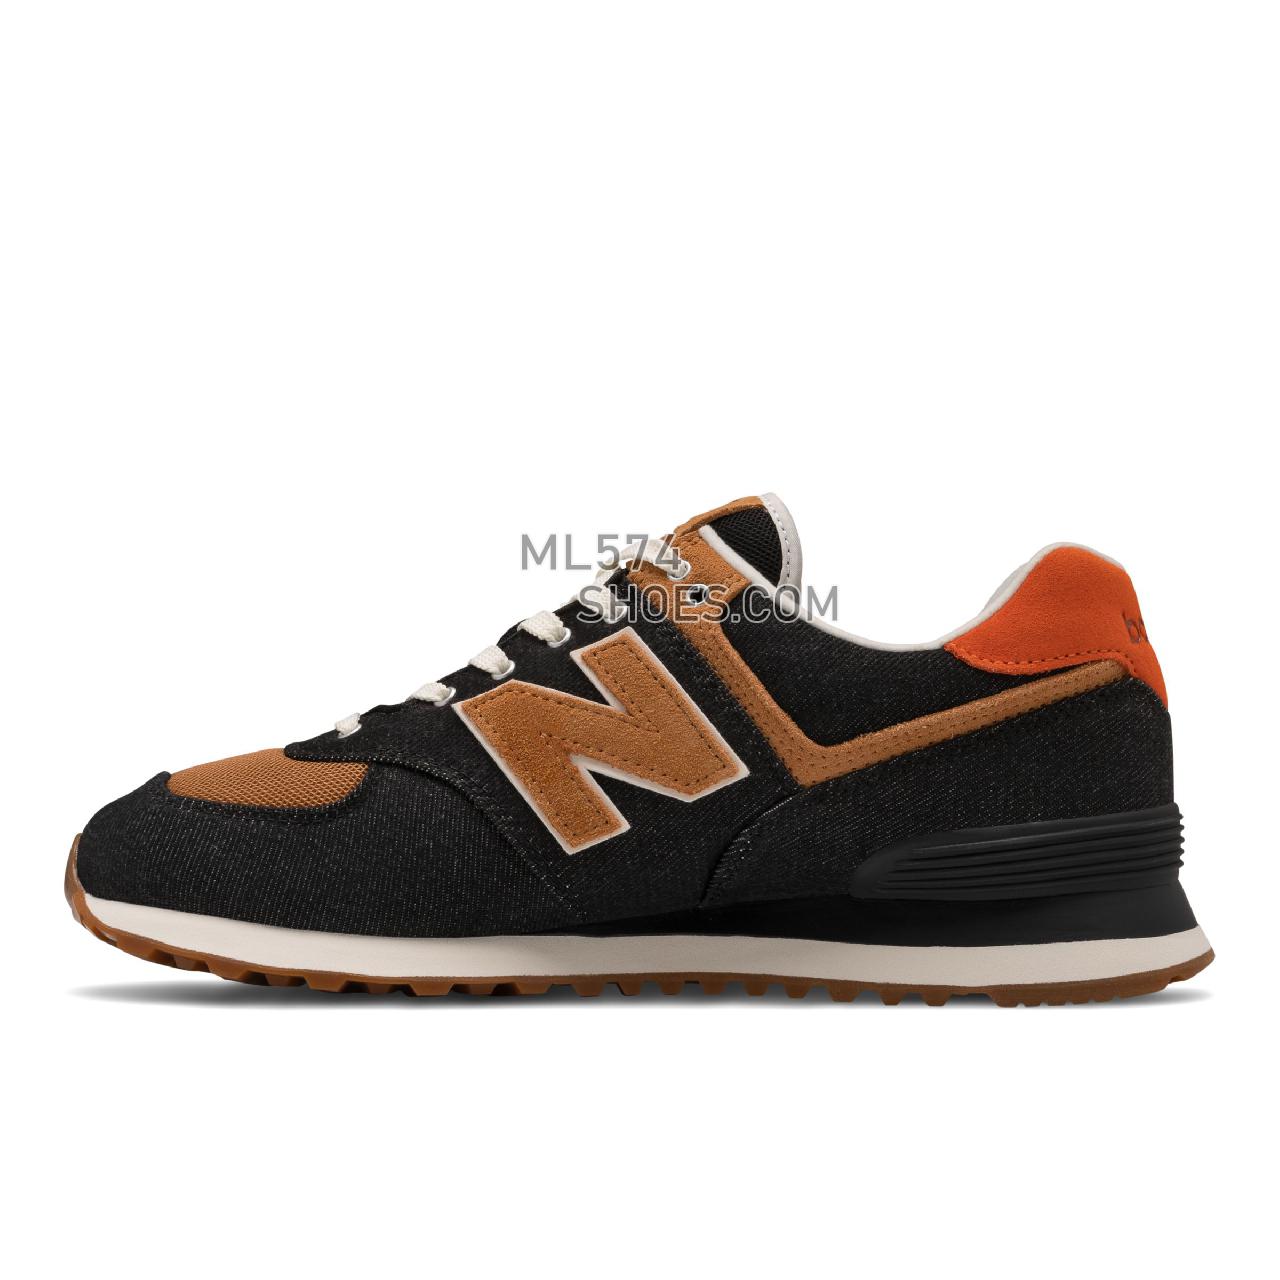 New Balance 574v2 Denim - Men's Classic Sneakers - Black with Faded Workwear - ML574DB2